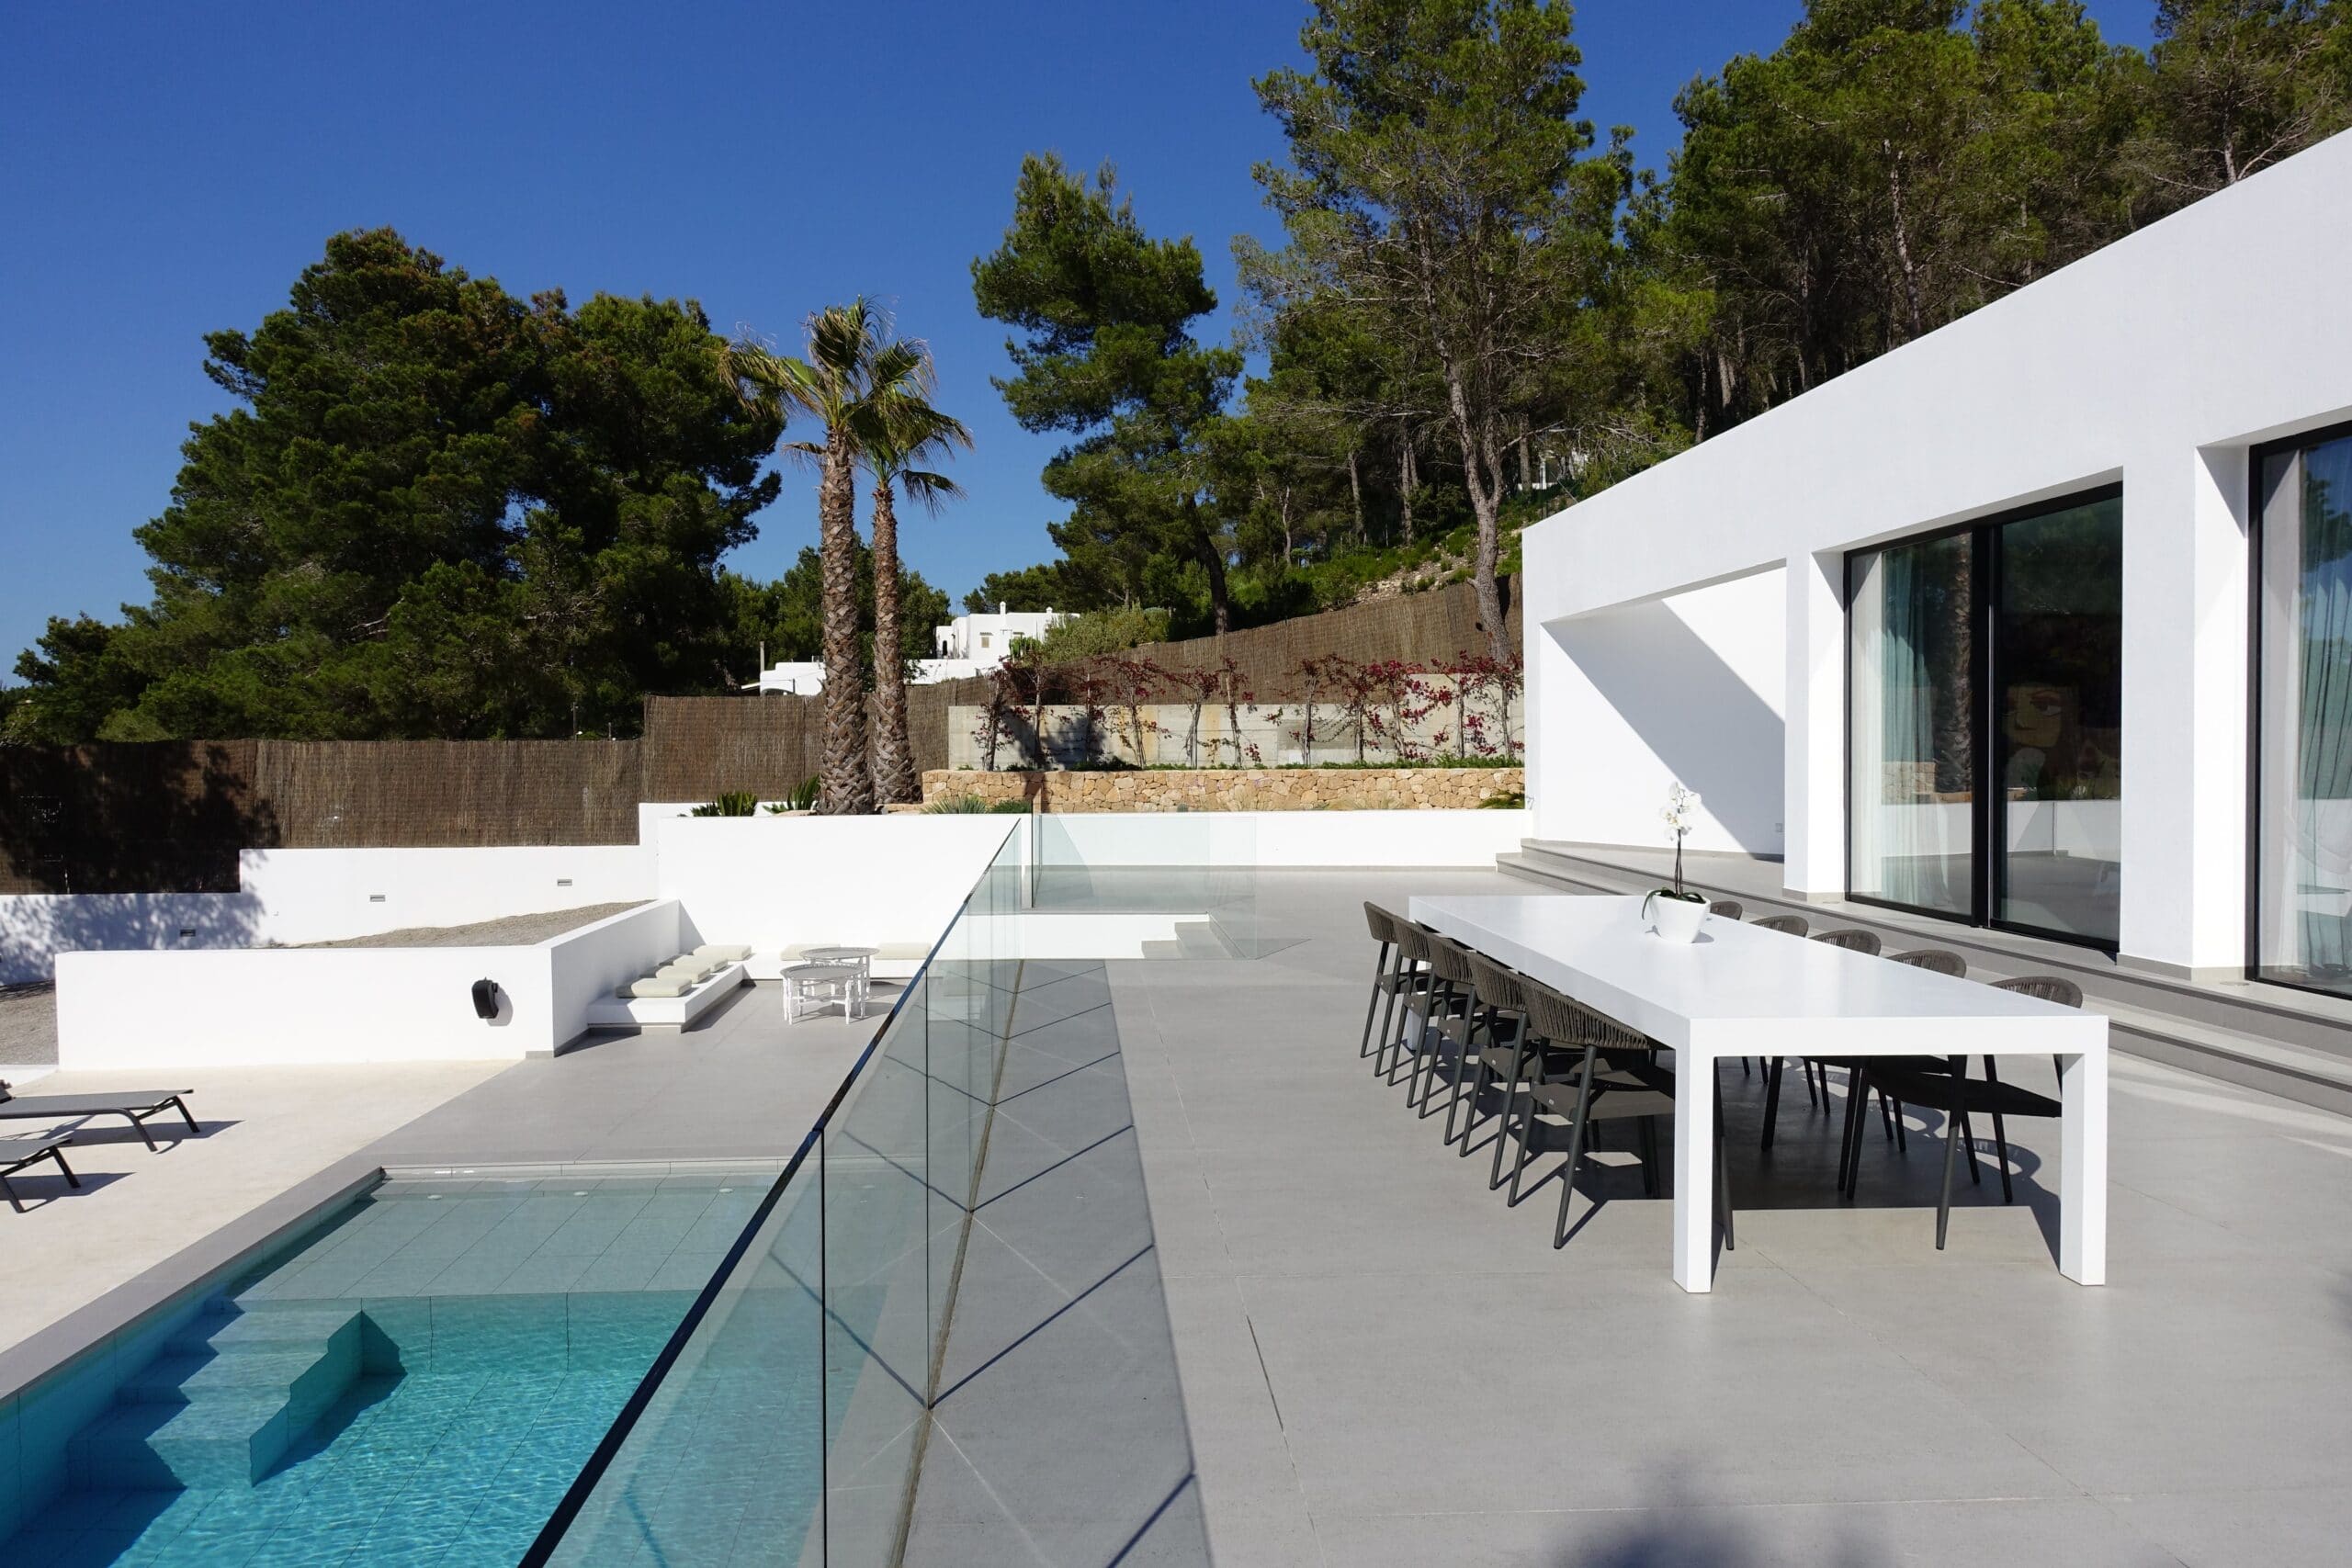 Image of Strato outdoor terrace 2 scaled in The perfect solution for an extra large house - Cosentino